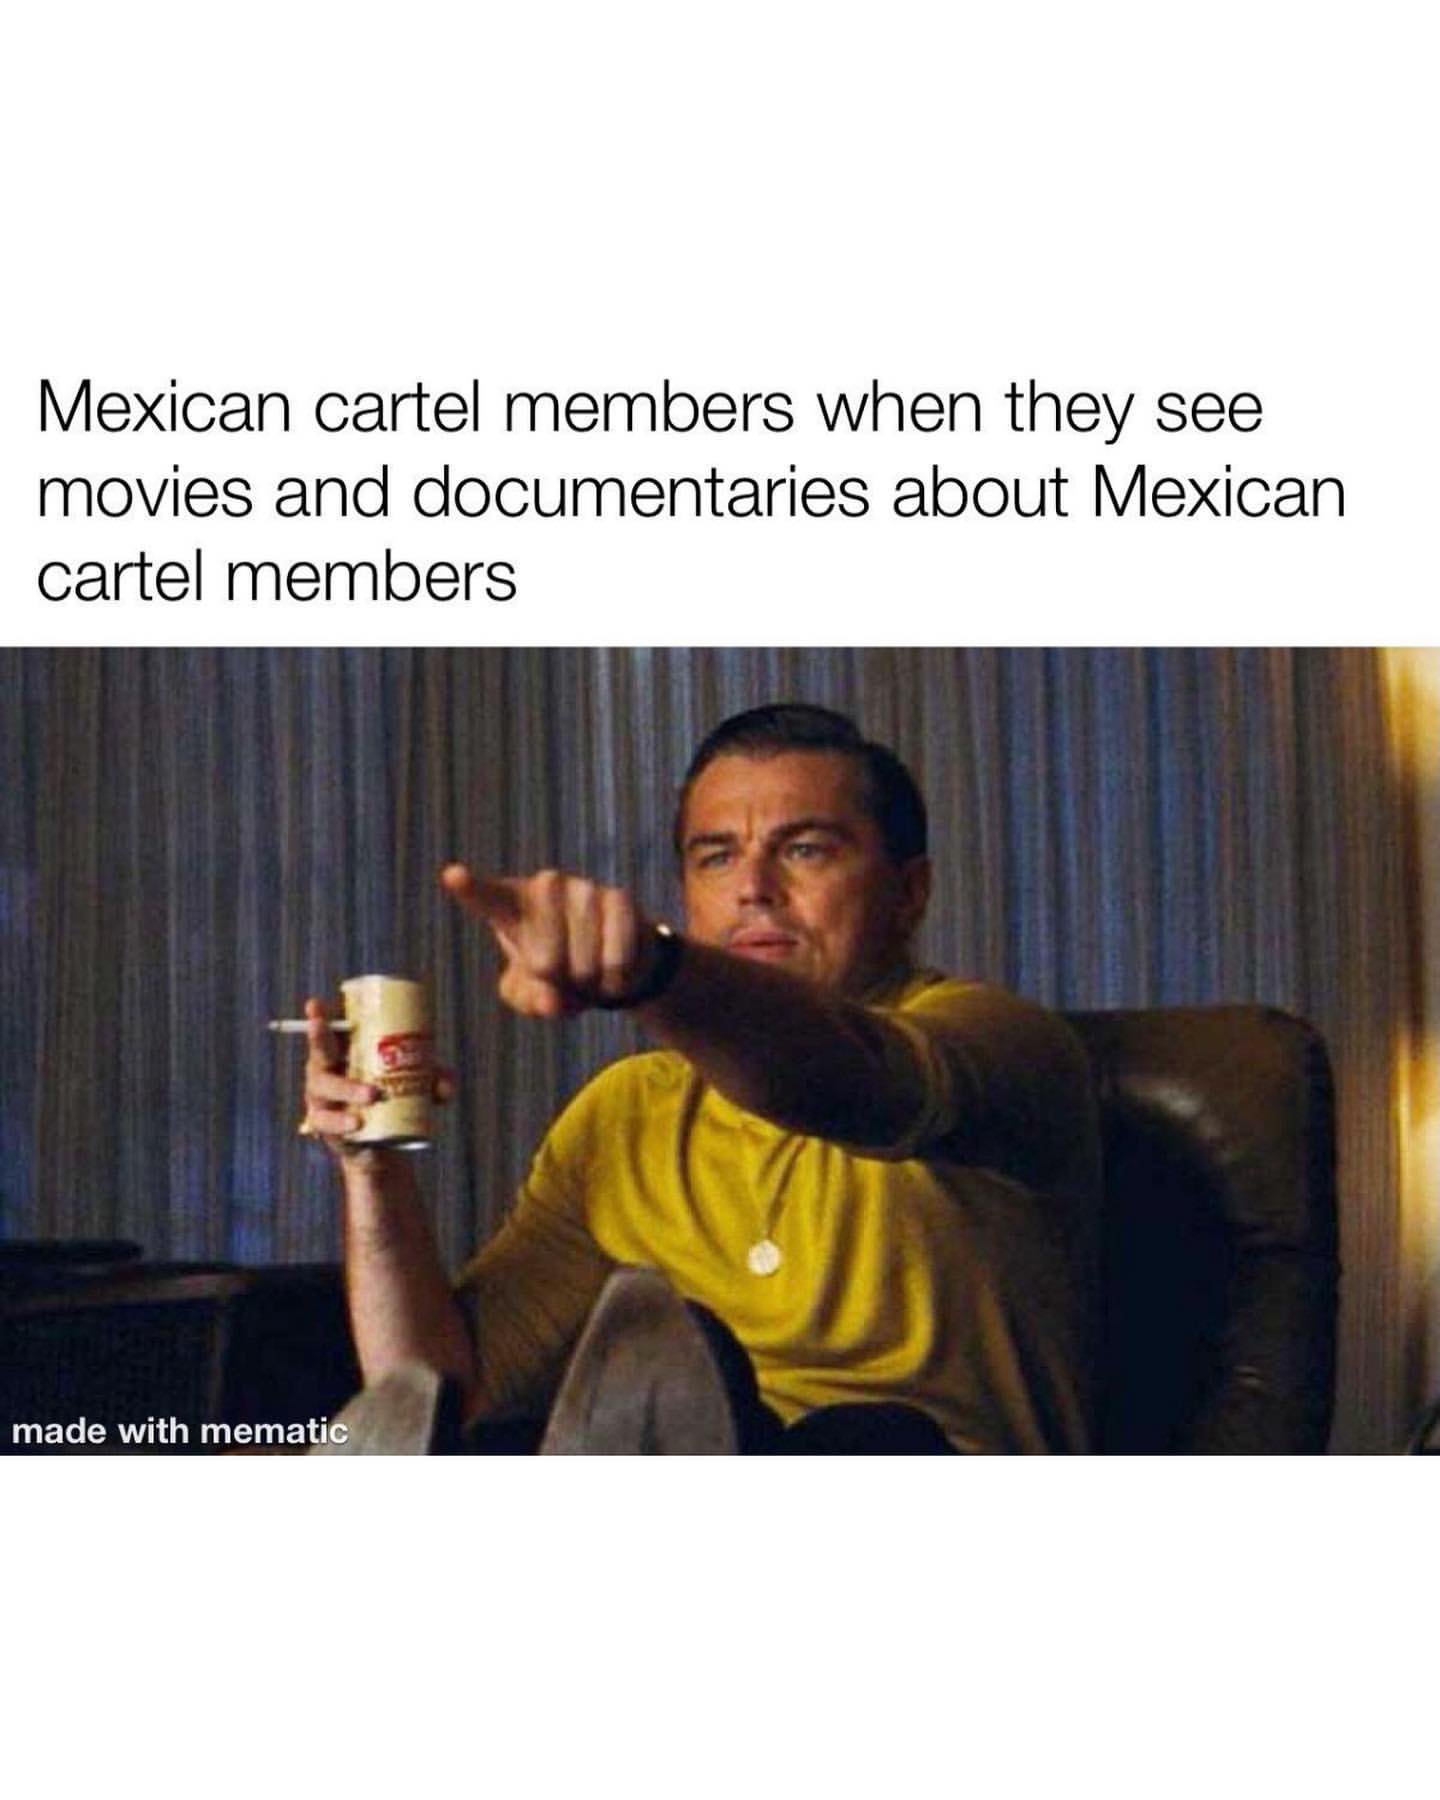 Mexican cartel members when they see movies and documentaries about Mexican cartel members.